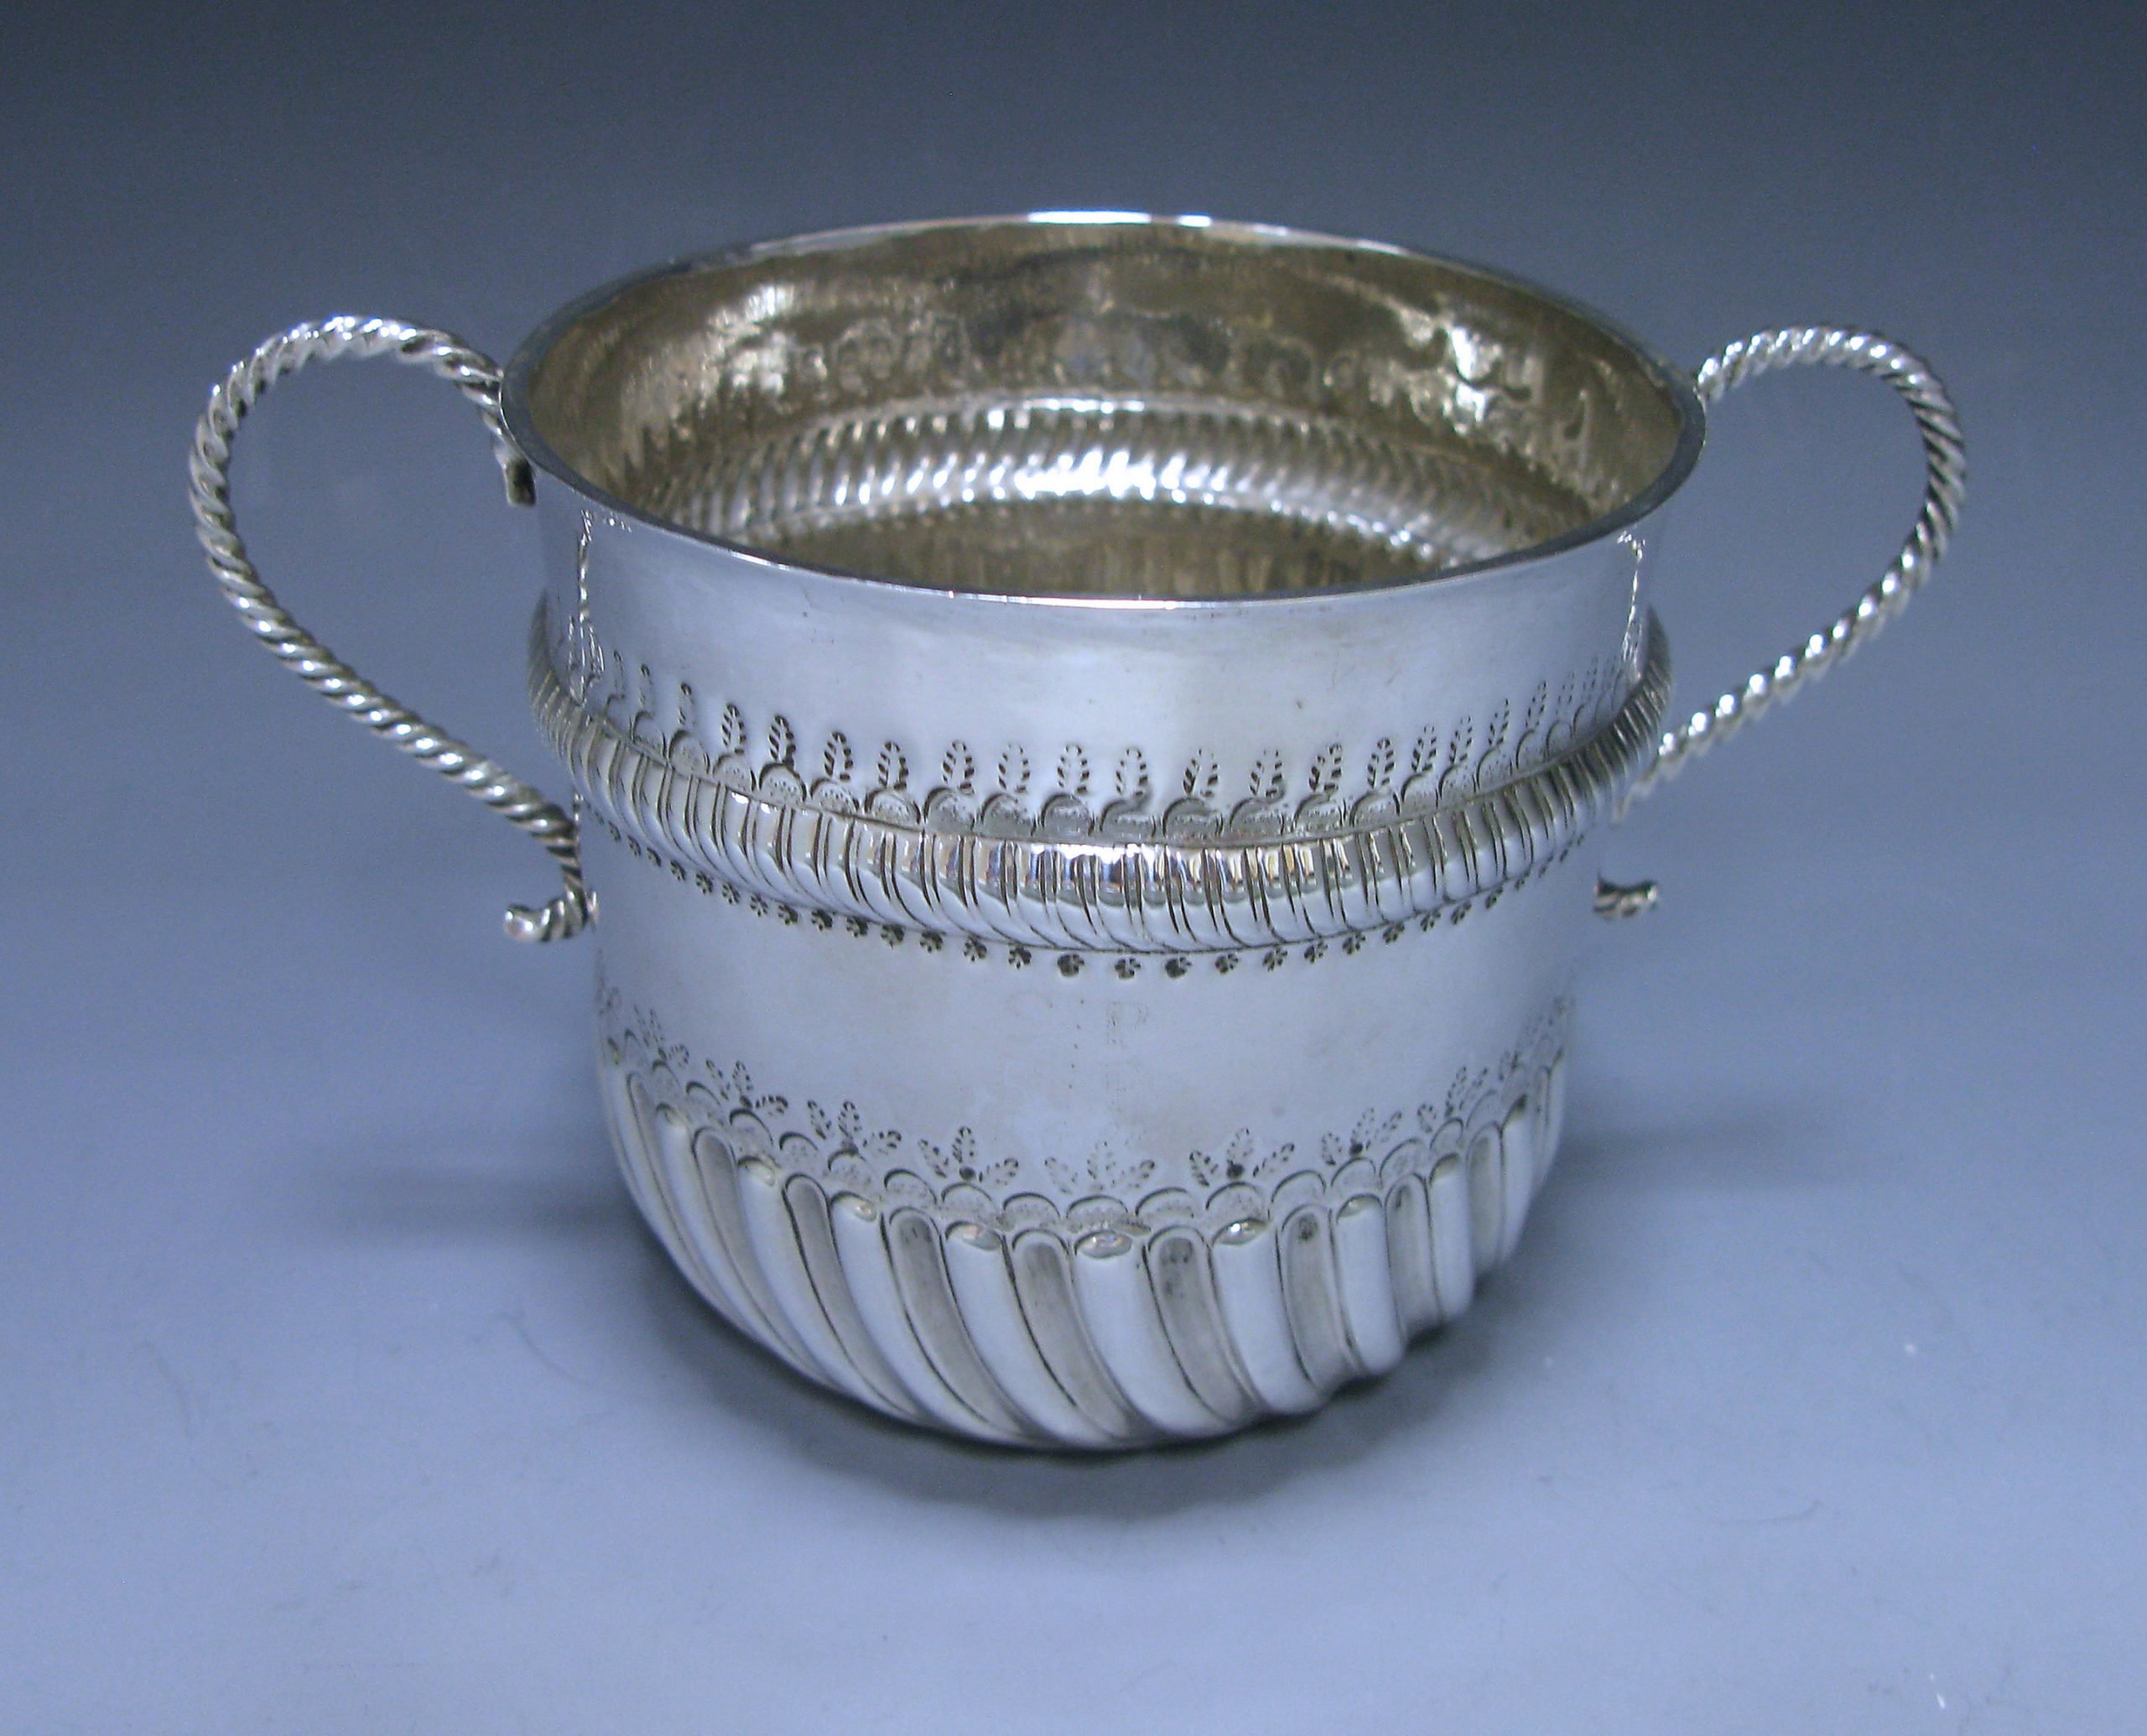 Antique Silver Porringer by John Murch of Plymouth c 1698 1